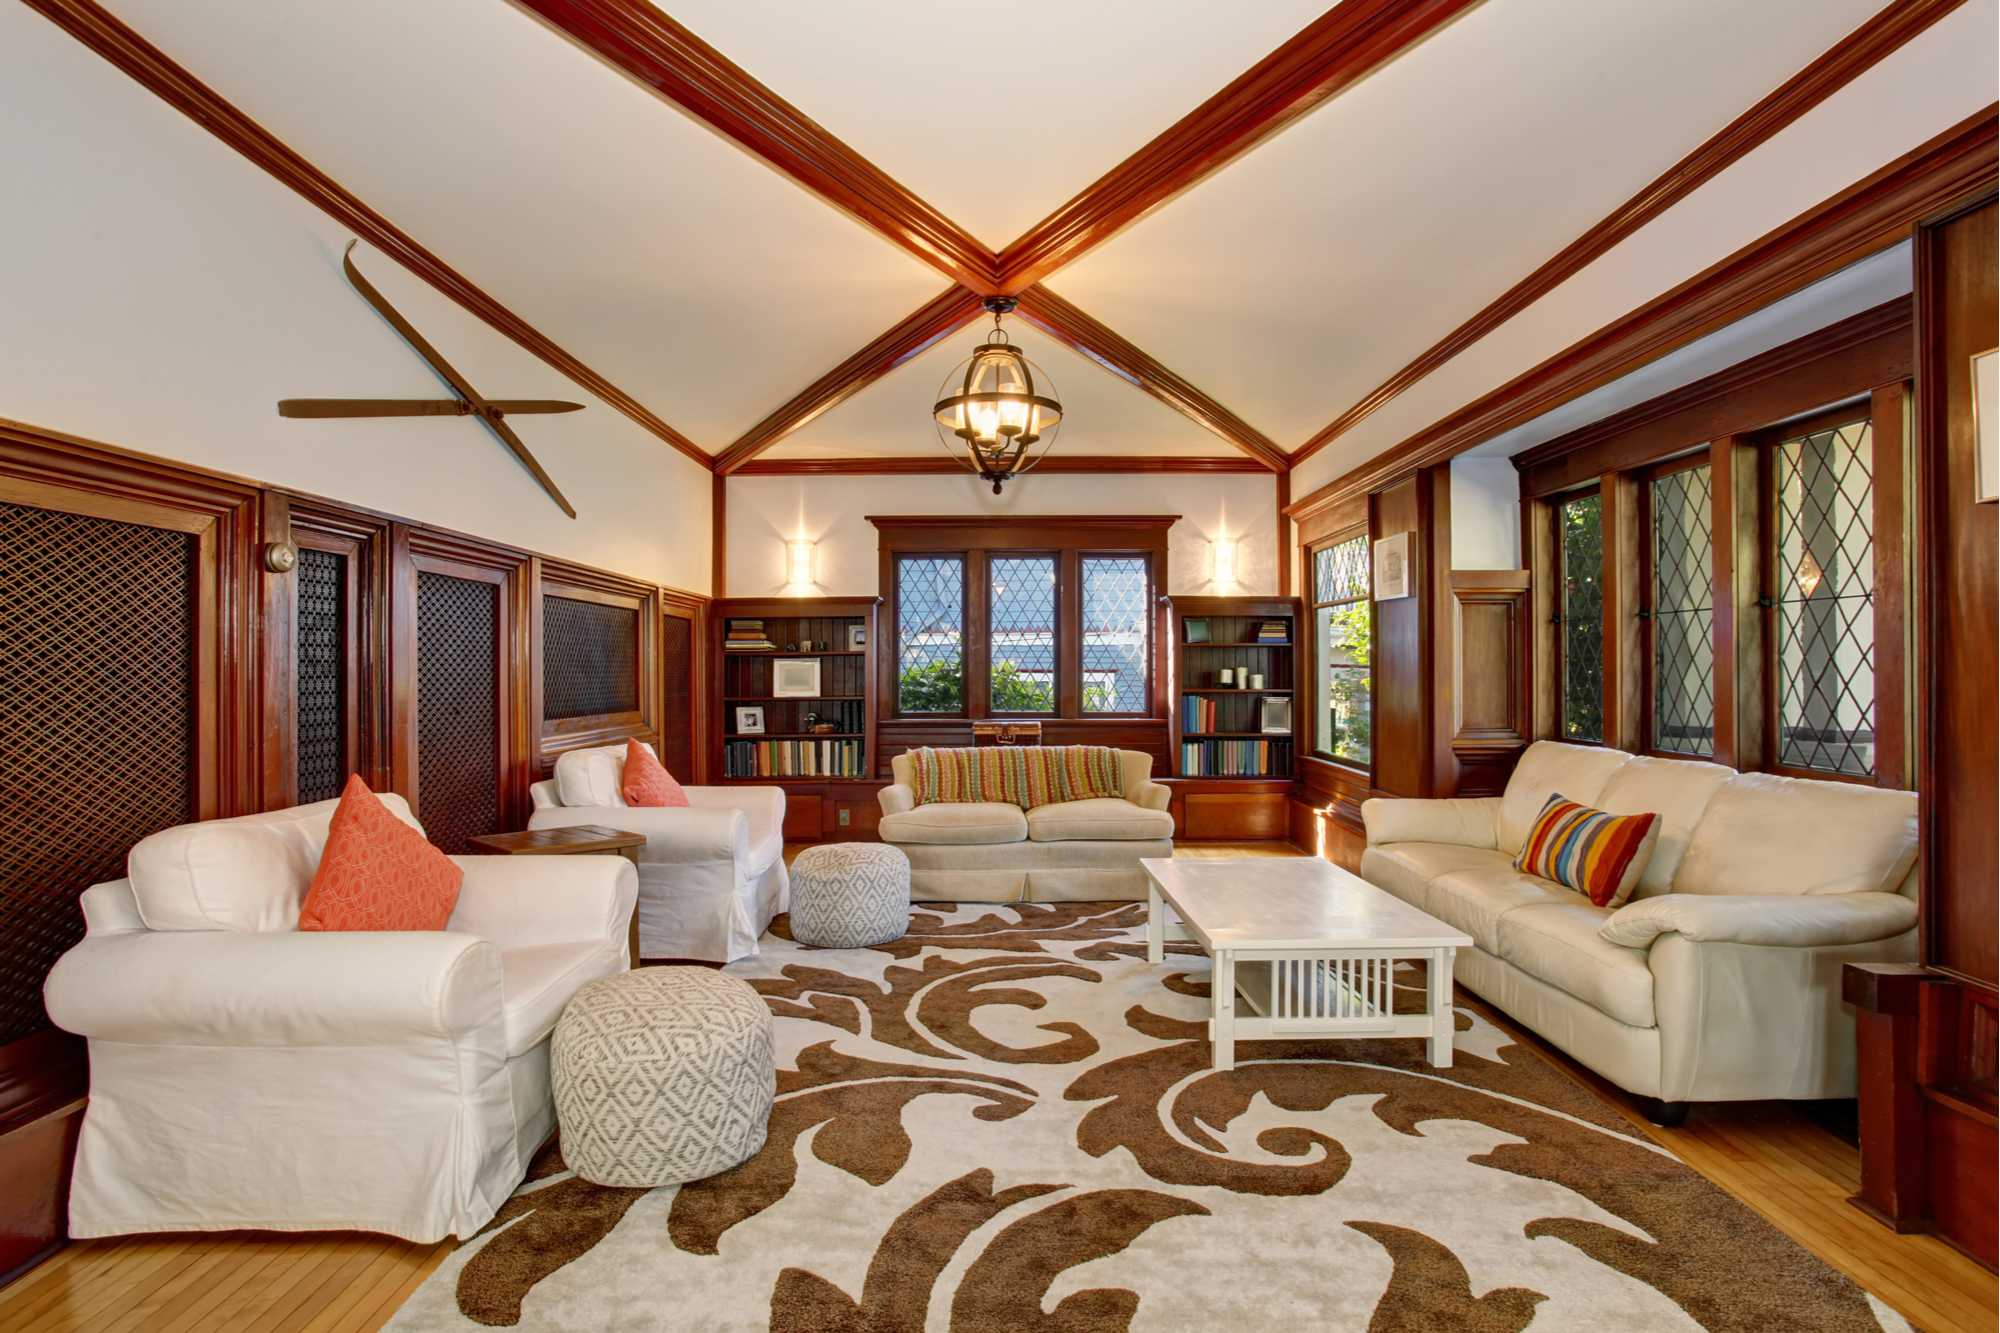 Brown and white patterned carpet in a large rustic living room